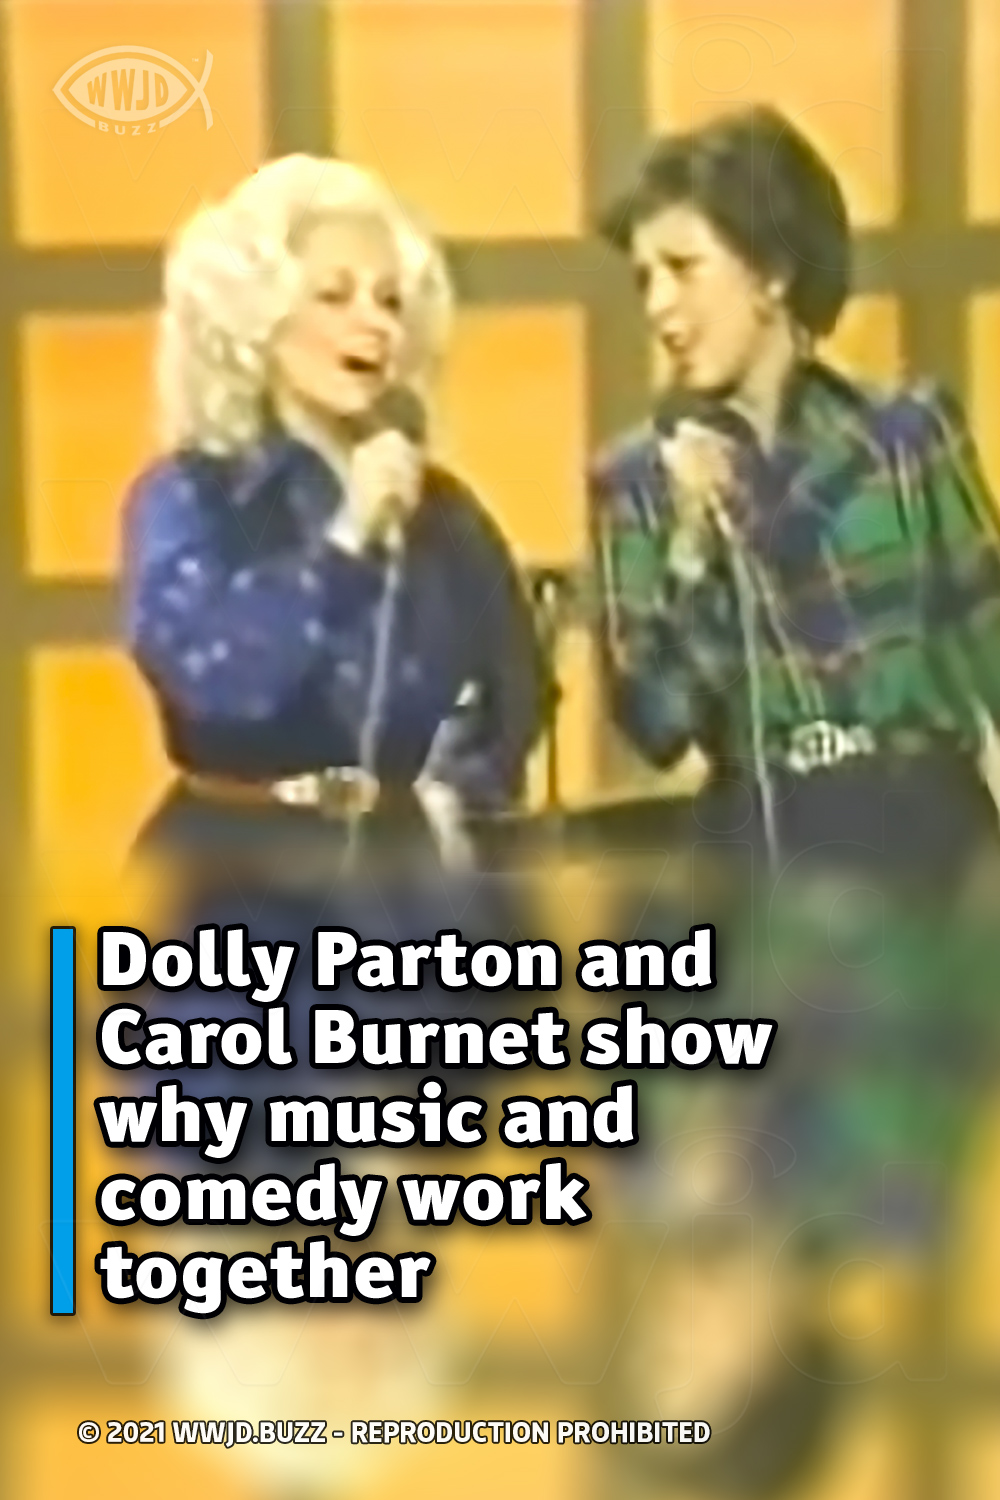 Dolly Parton and Carol Burnet show why music and comedy work together